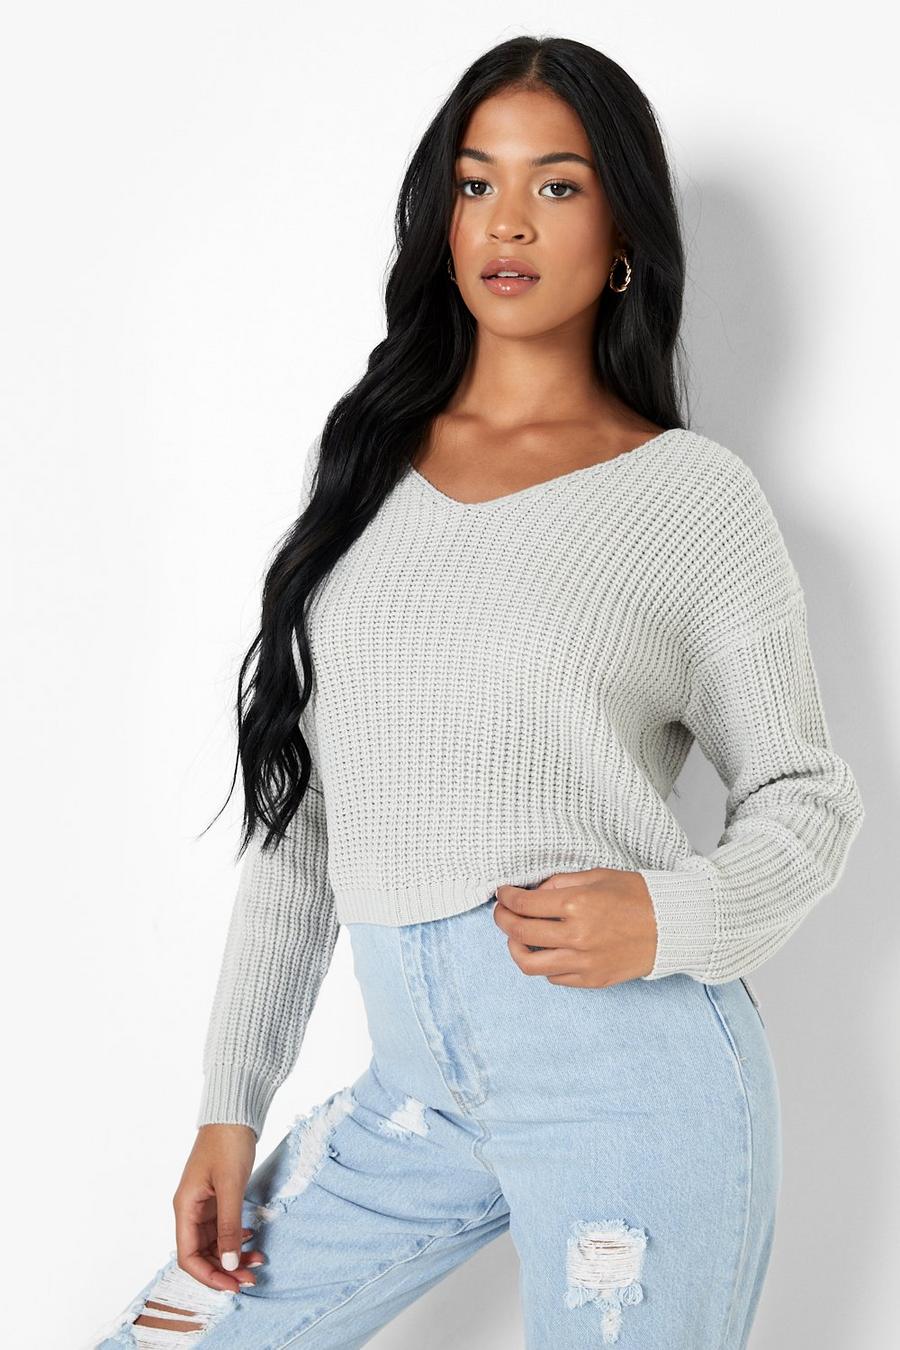 Cardigan Sweaters for Women Graphic Sweater Women Lightweight Sweater Strip  Off Shoulder Knit Tops Casual Loose Blouse Shirt Sweaters for Women